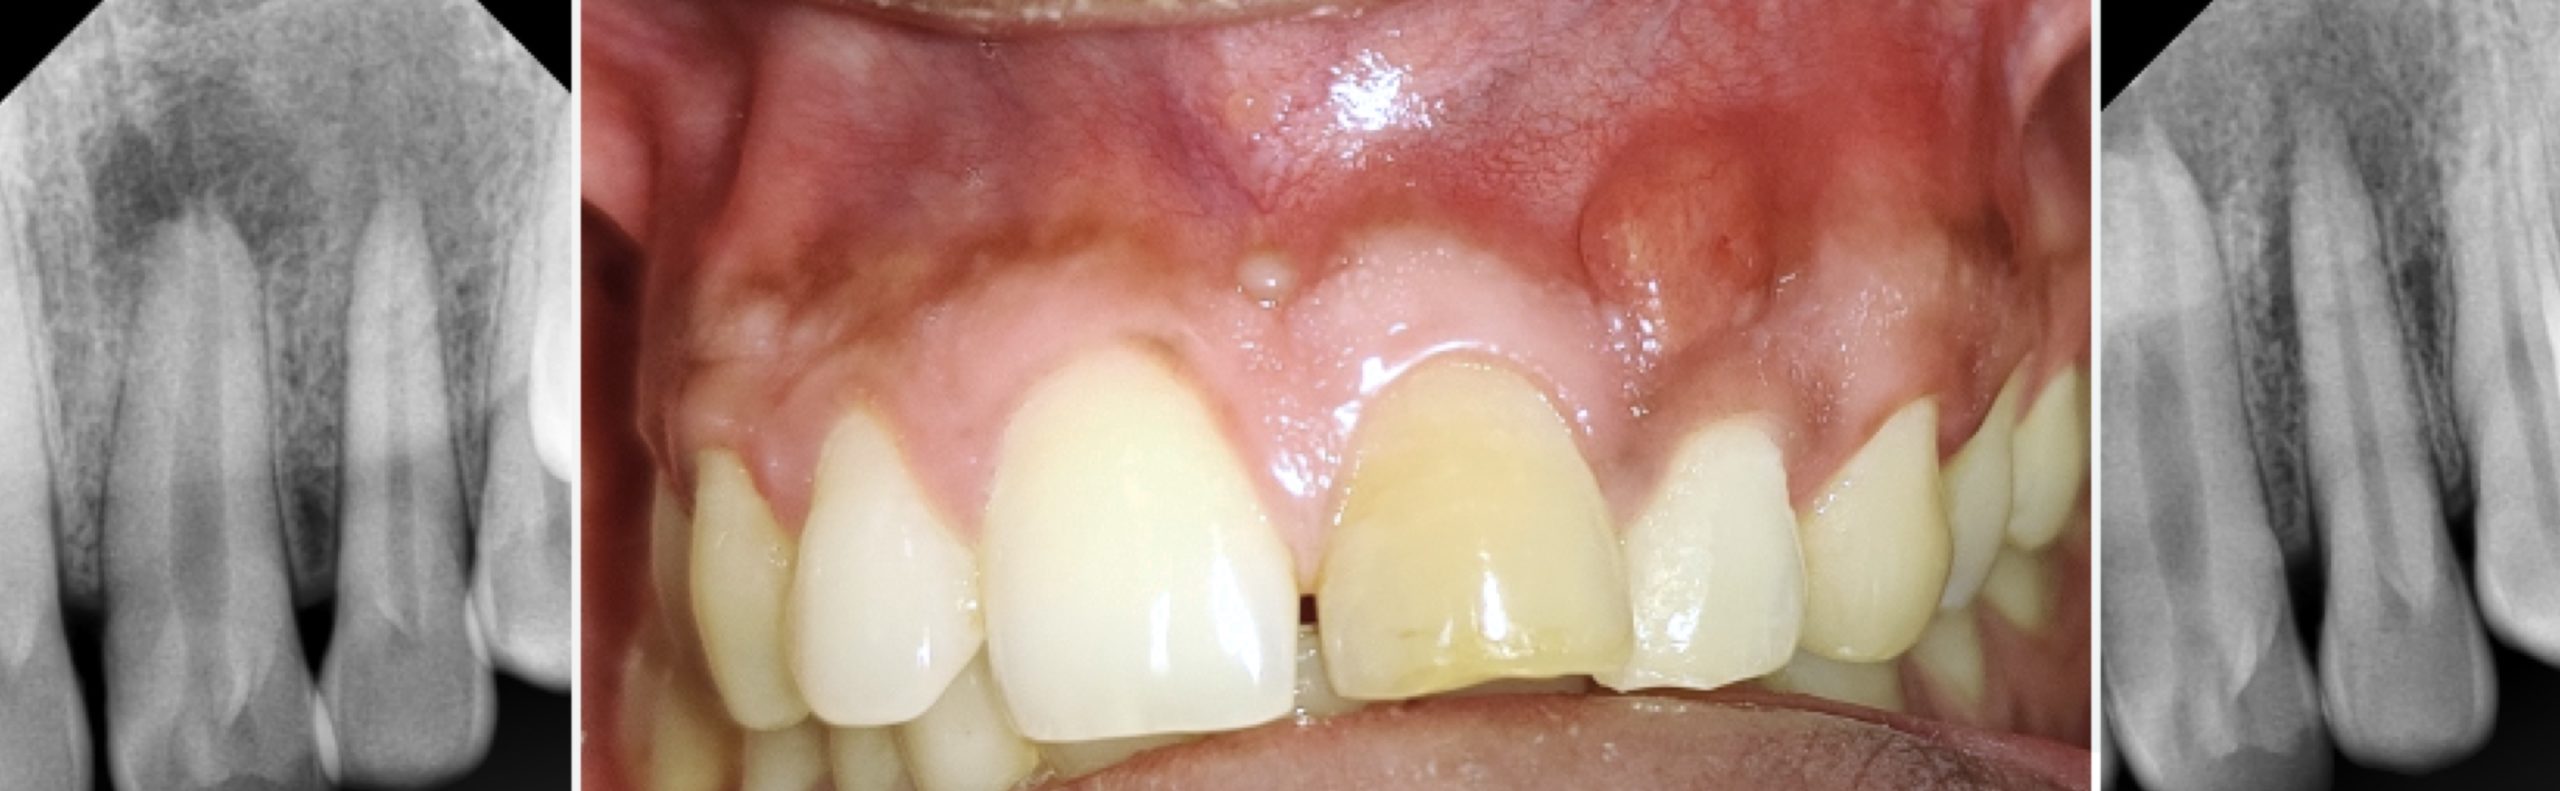 Efficient cleaning and proper sealing of root canals, the key to endodontic success- a case of  non-surgical endodontic management of tooth number 21 and 22.